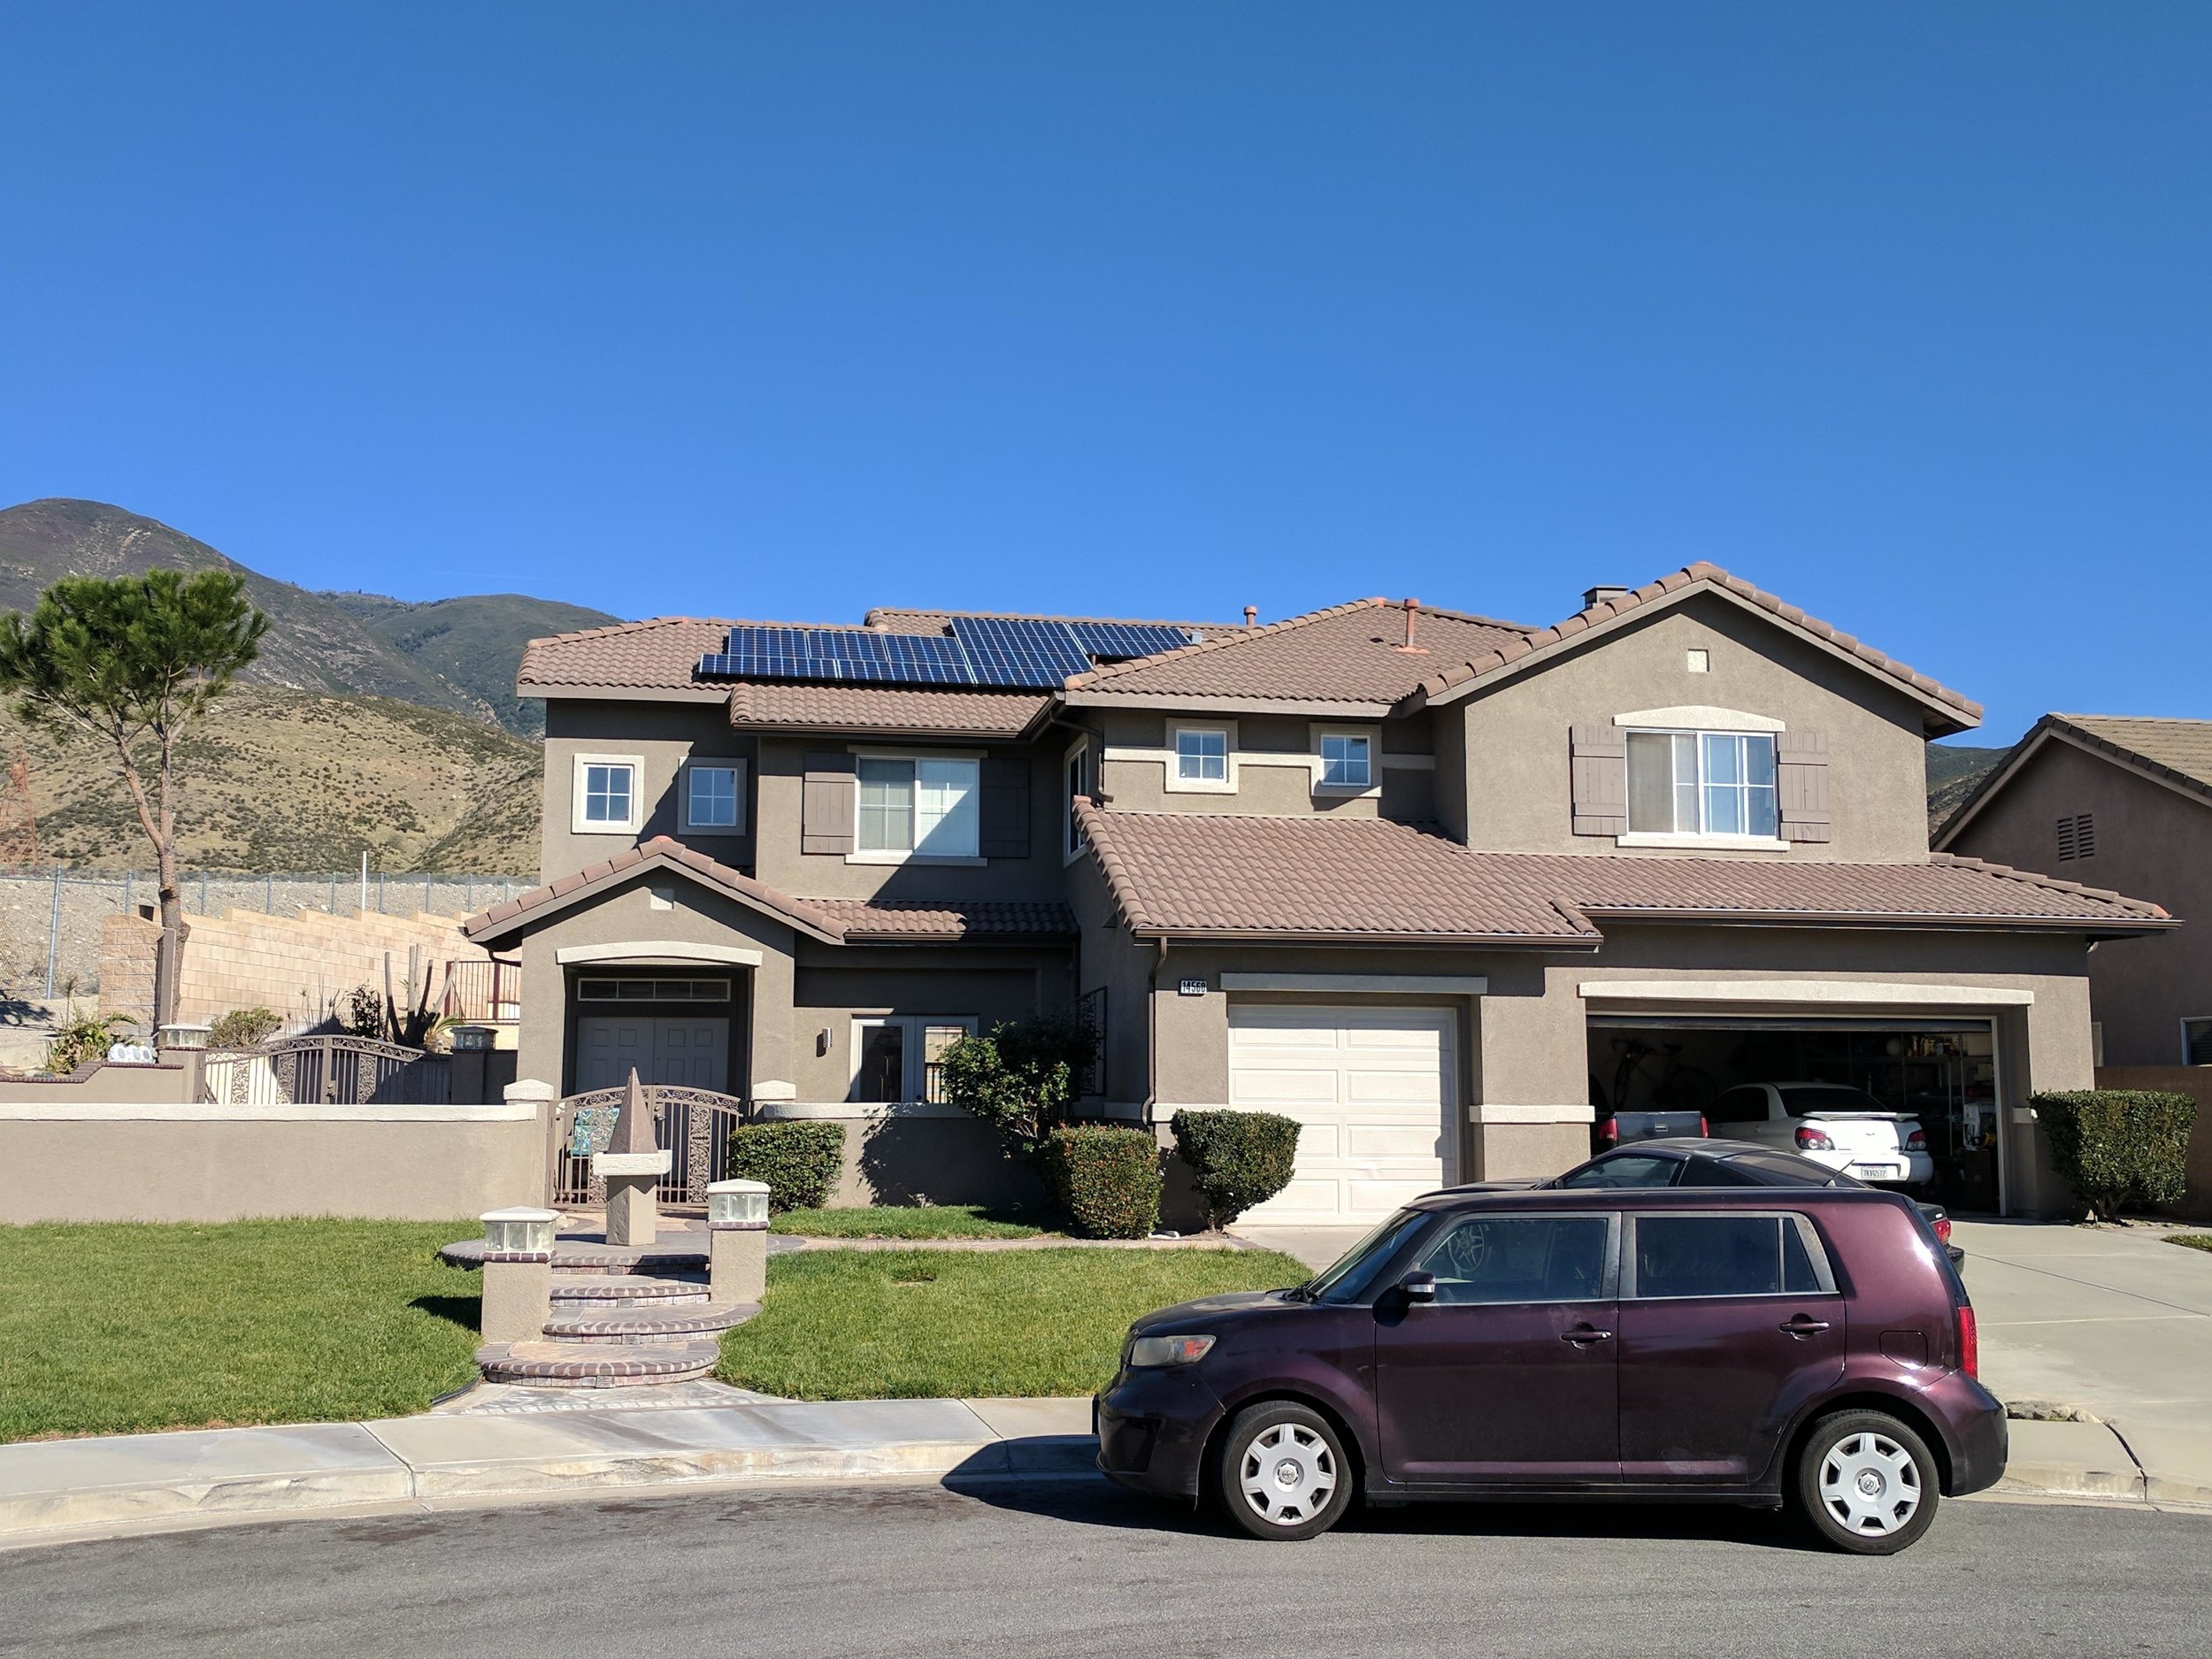 How to Find the Best Los Angeles Solar Panels Provider that Gives Customers Top Savings